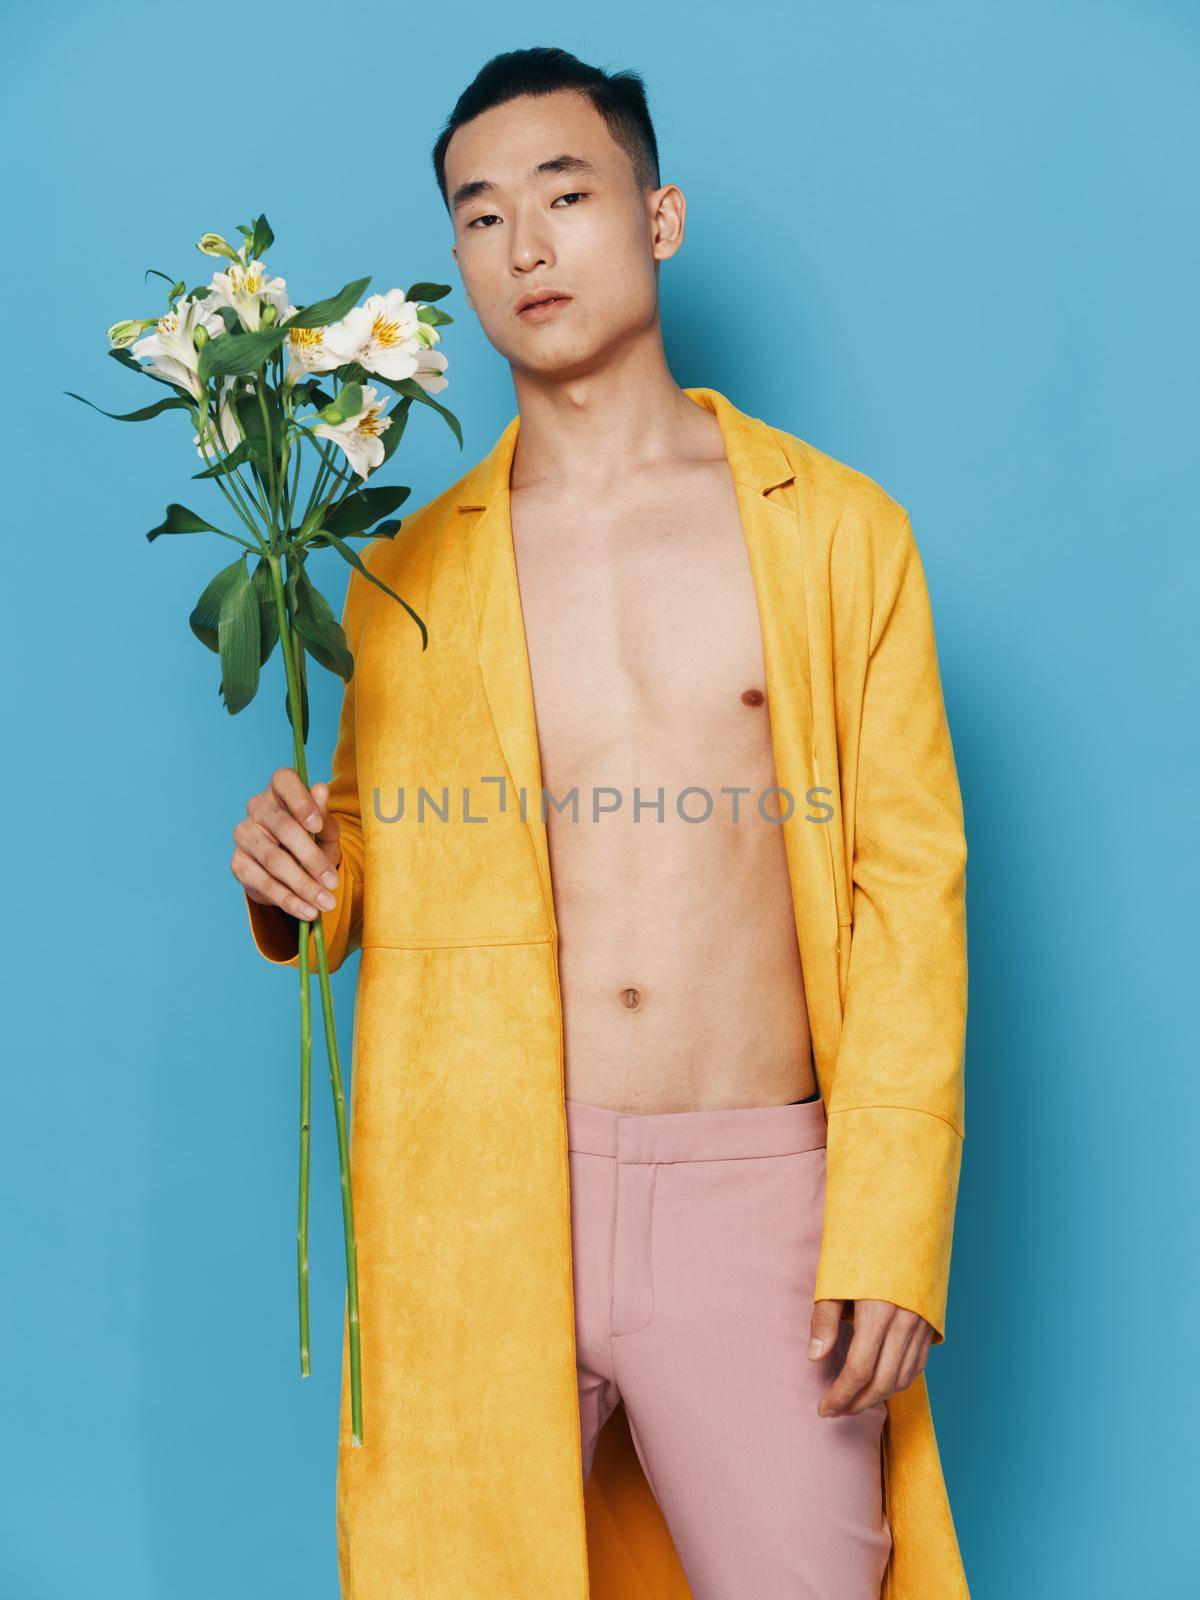 Asian man with a bouquet of white flowers gifts holidays by SHOTPRIME